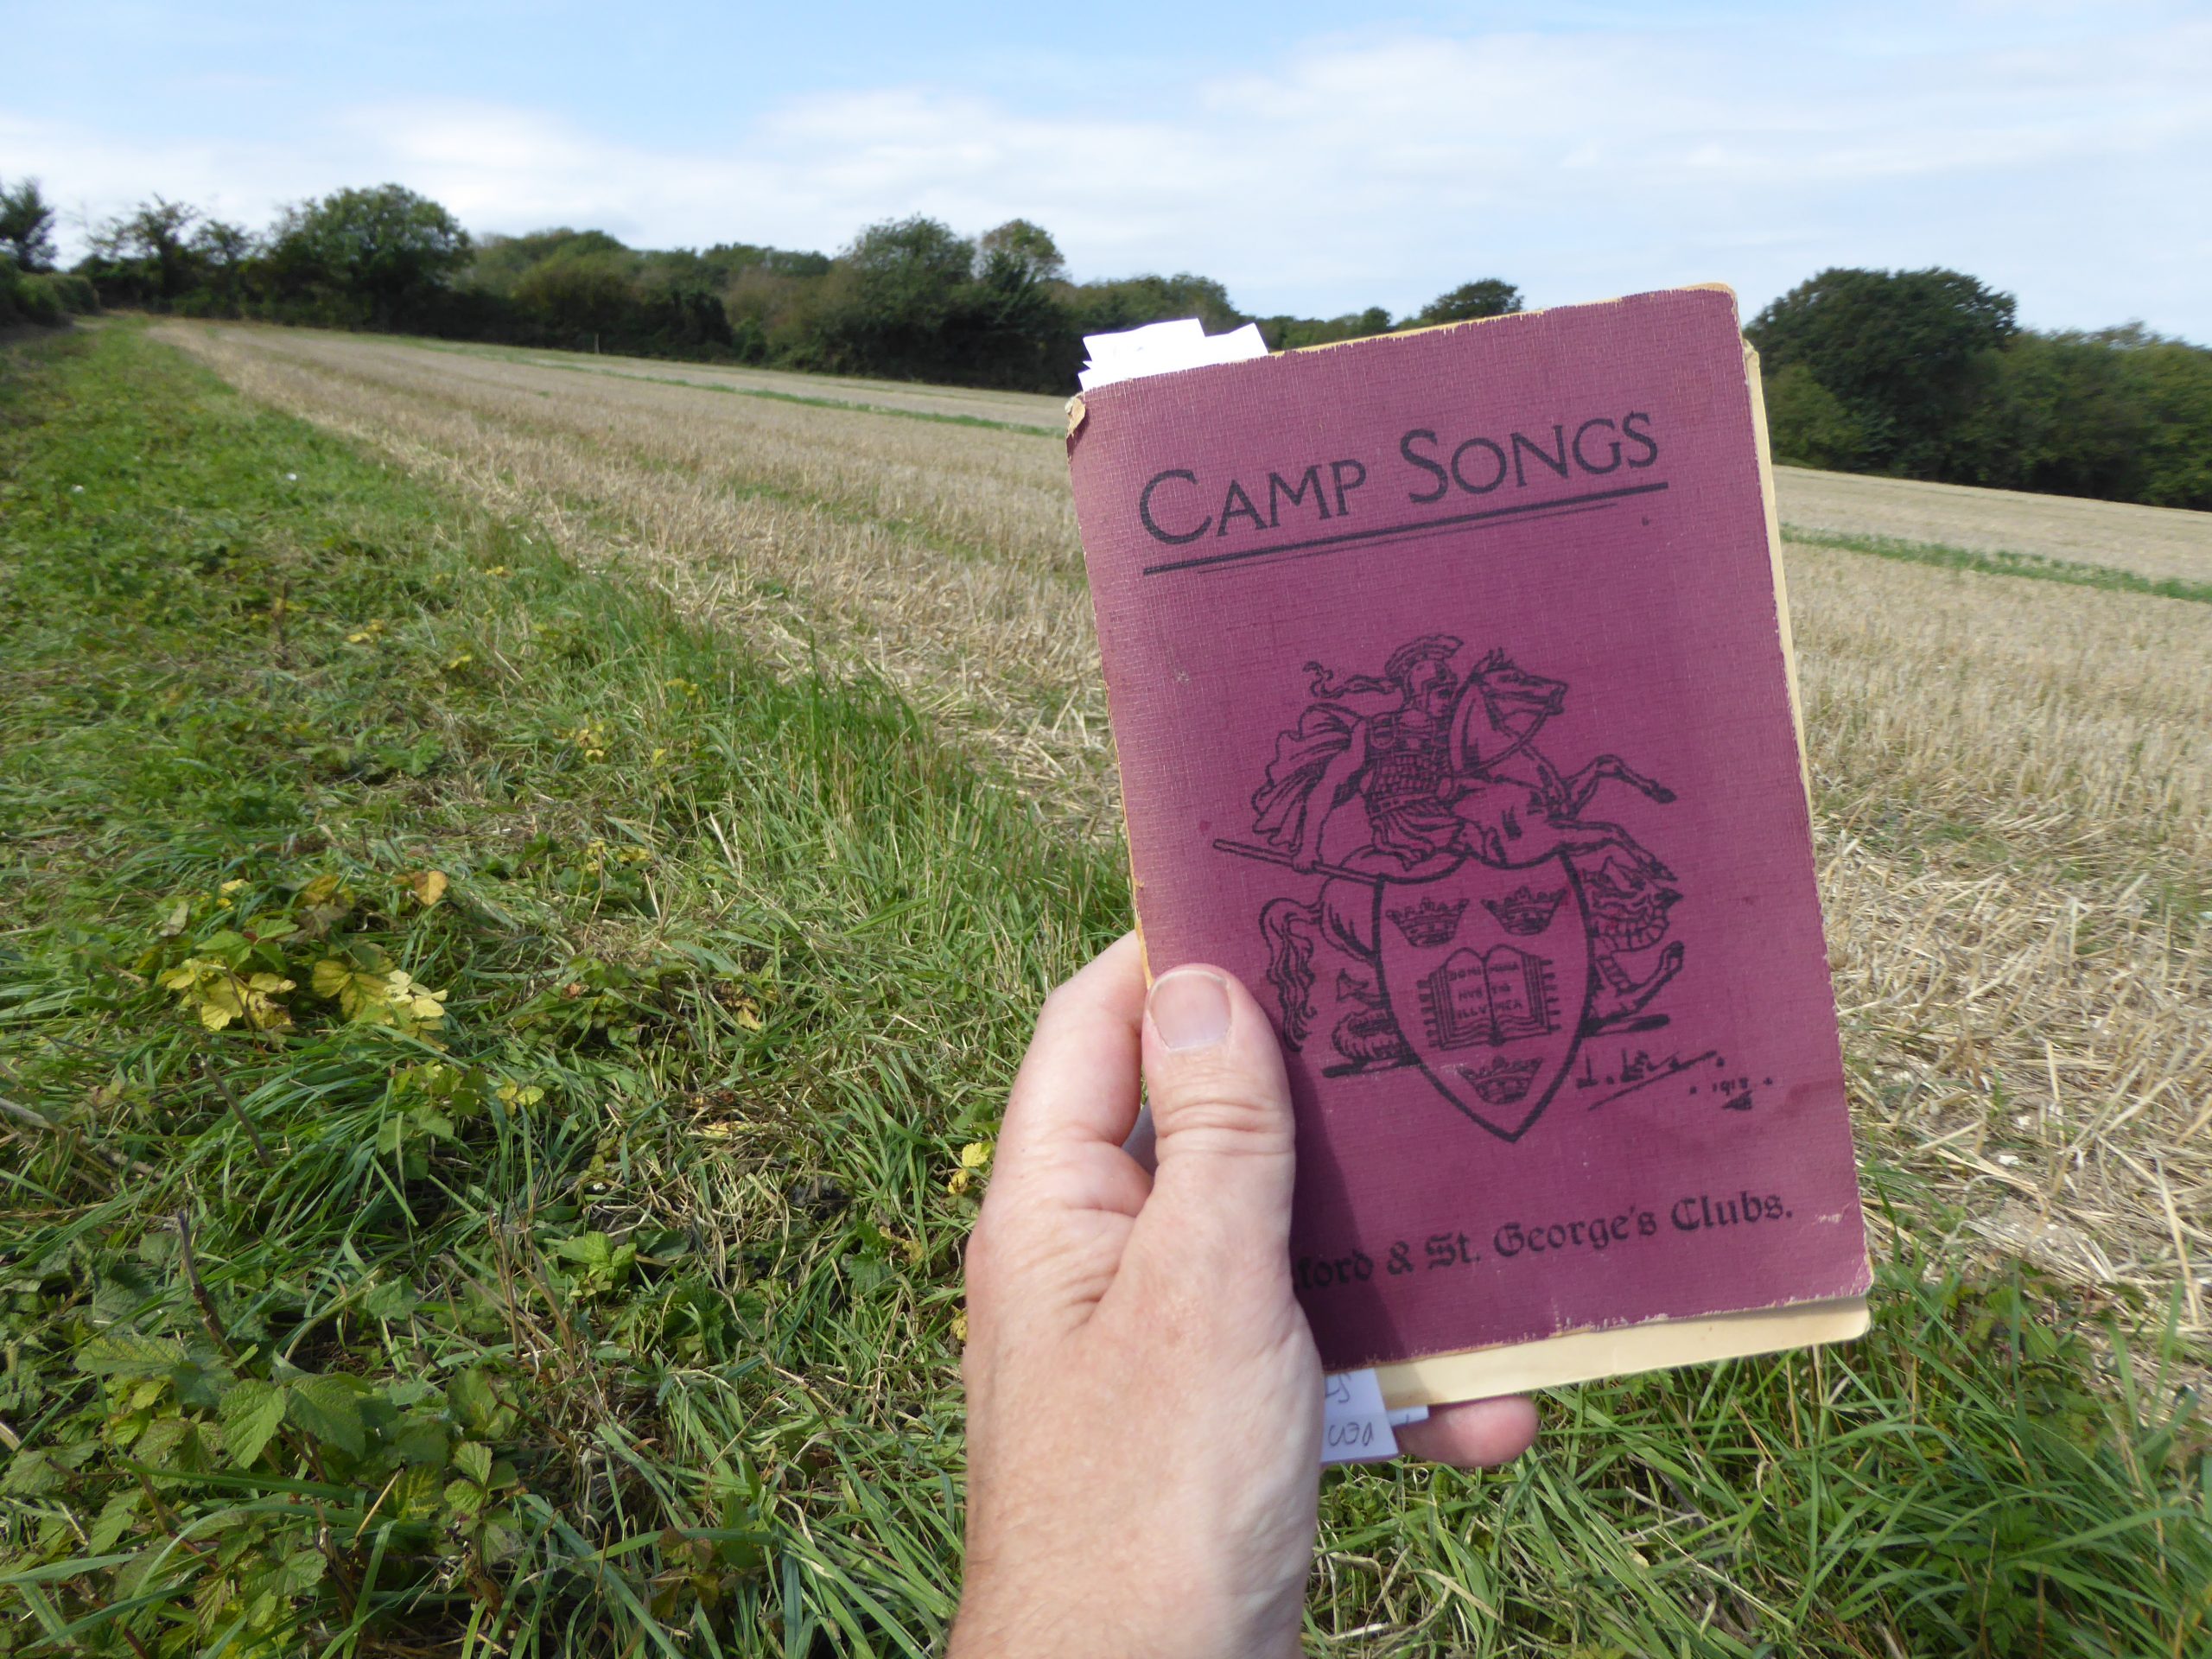 Camp song book in Highdown field, summer 2020 by Hamish MacGillivray